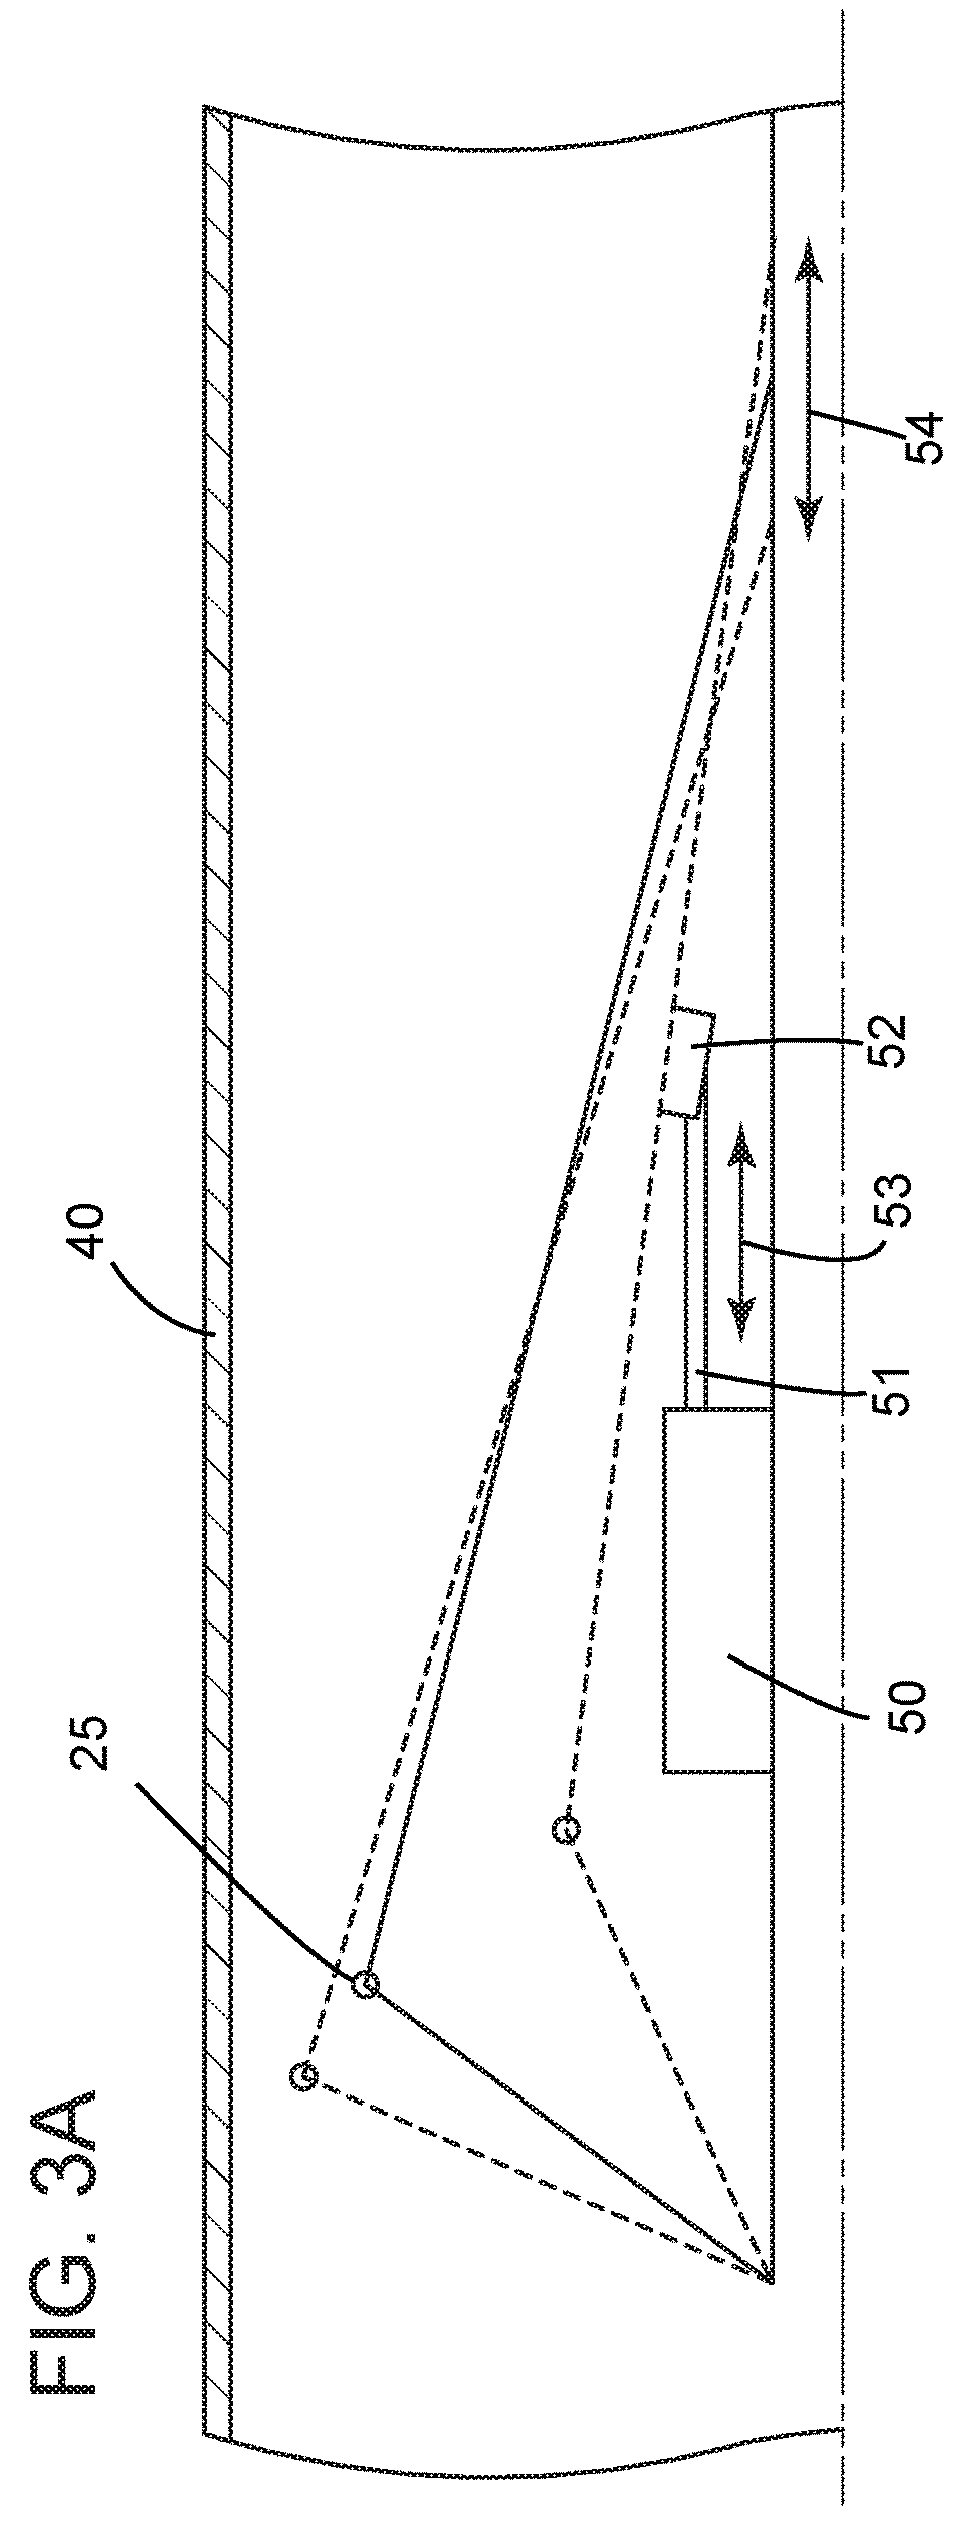 Method and apparatus for stabilizing gas/liquid flow in a vertical conduit